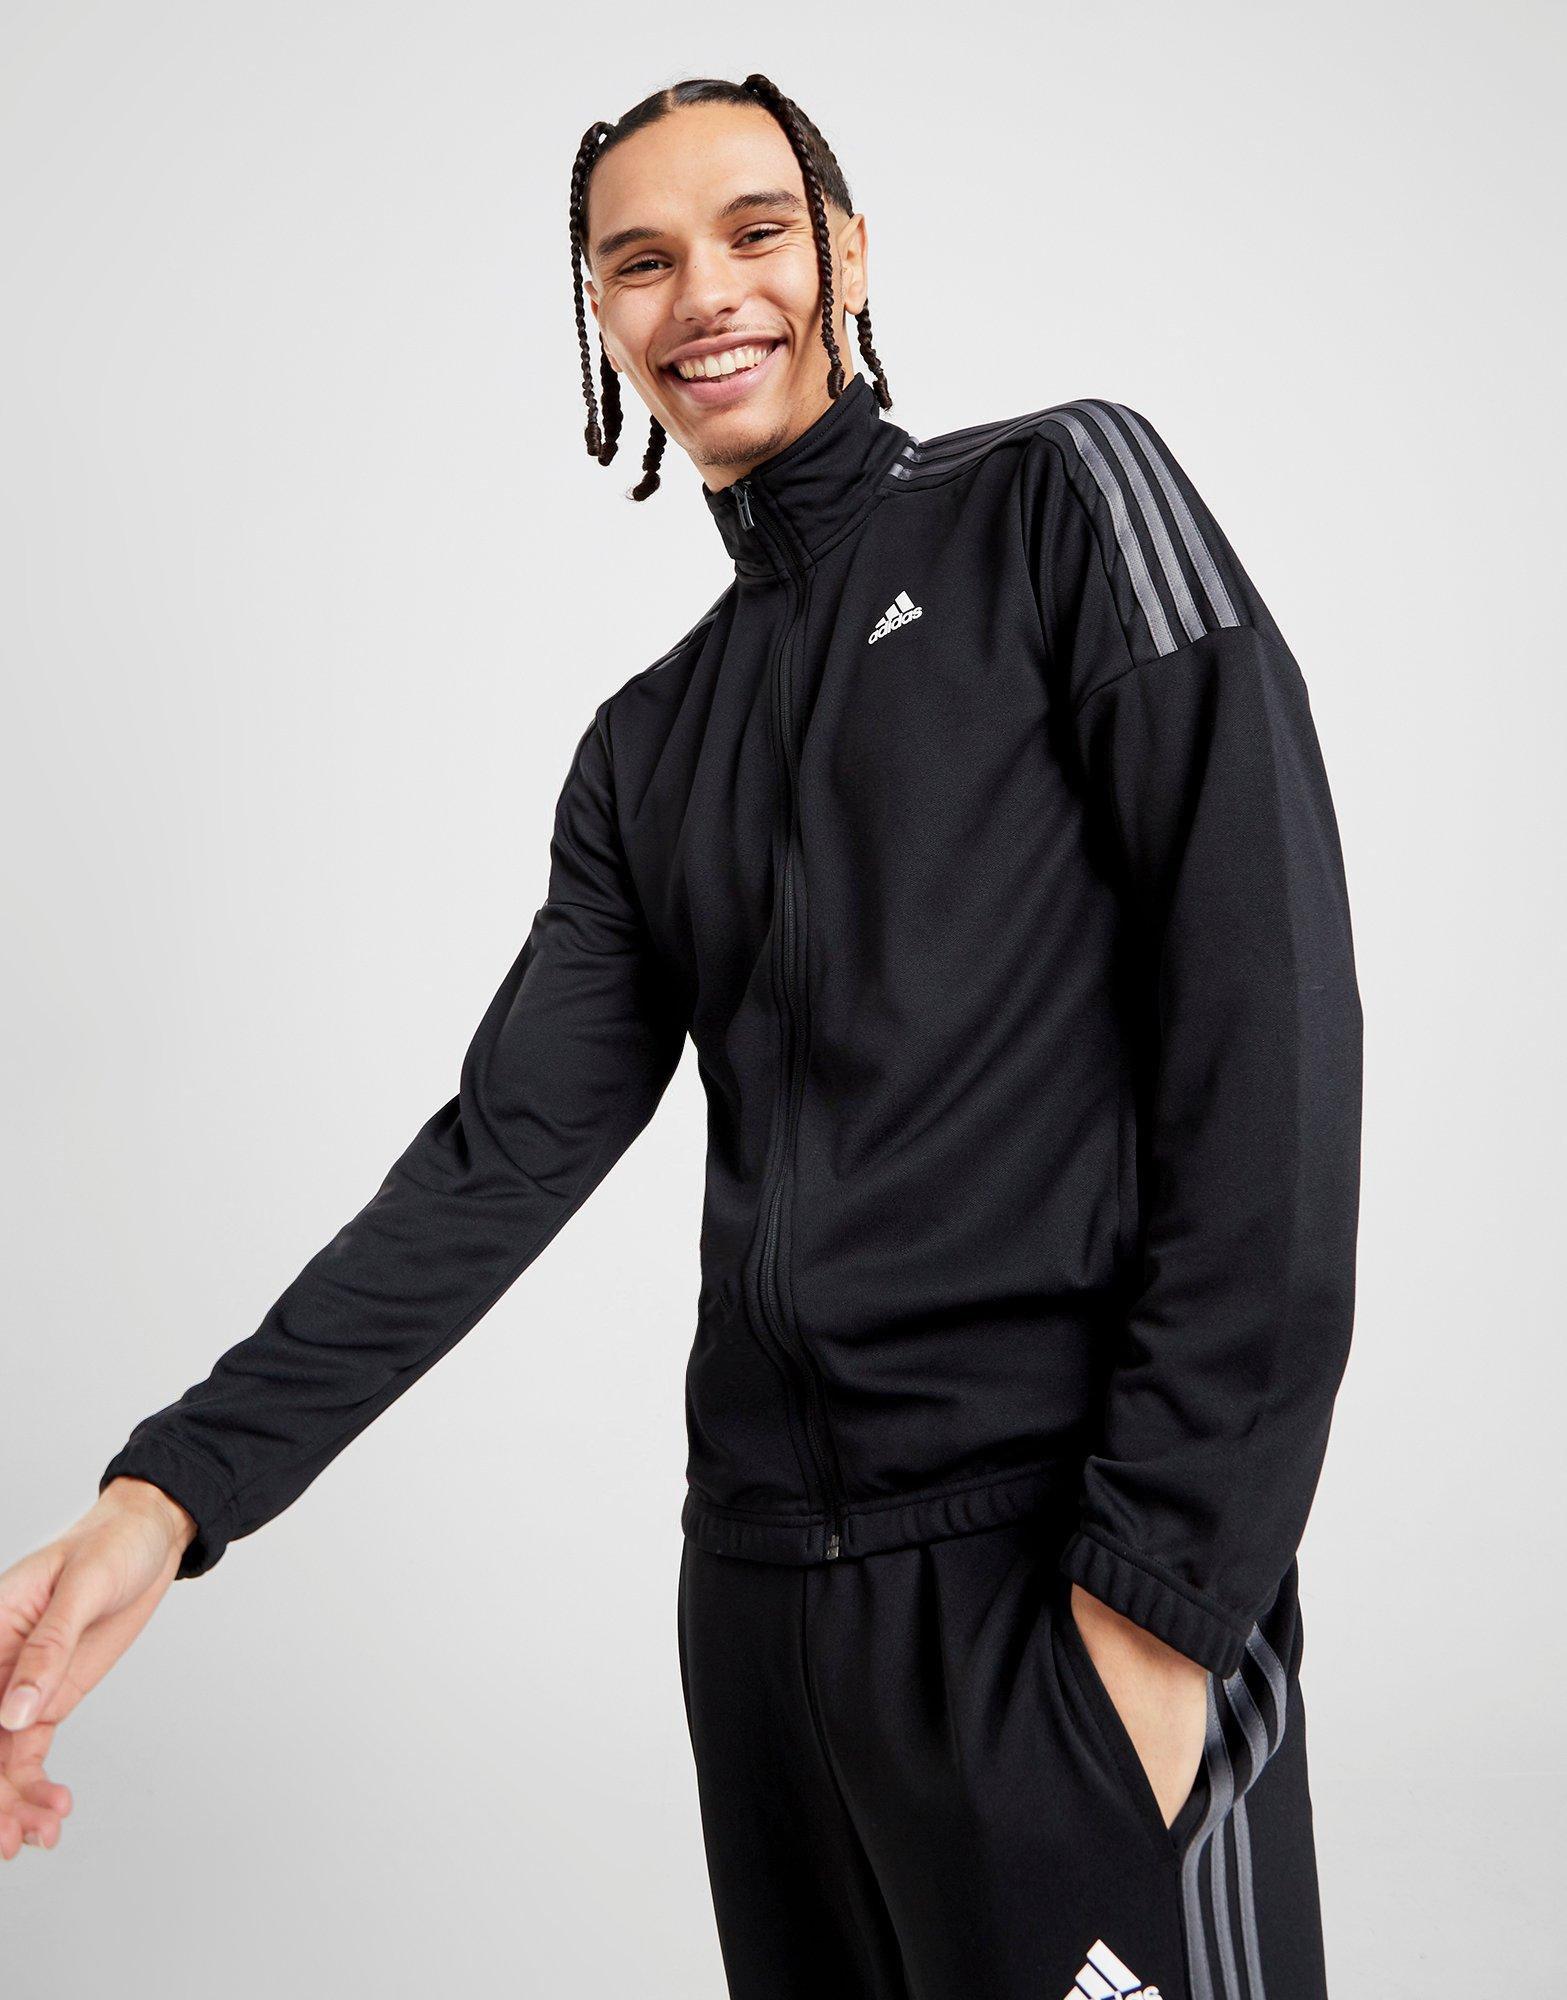 Buy adidas 3-Stripes Poly Track Top 